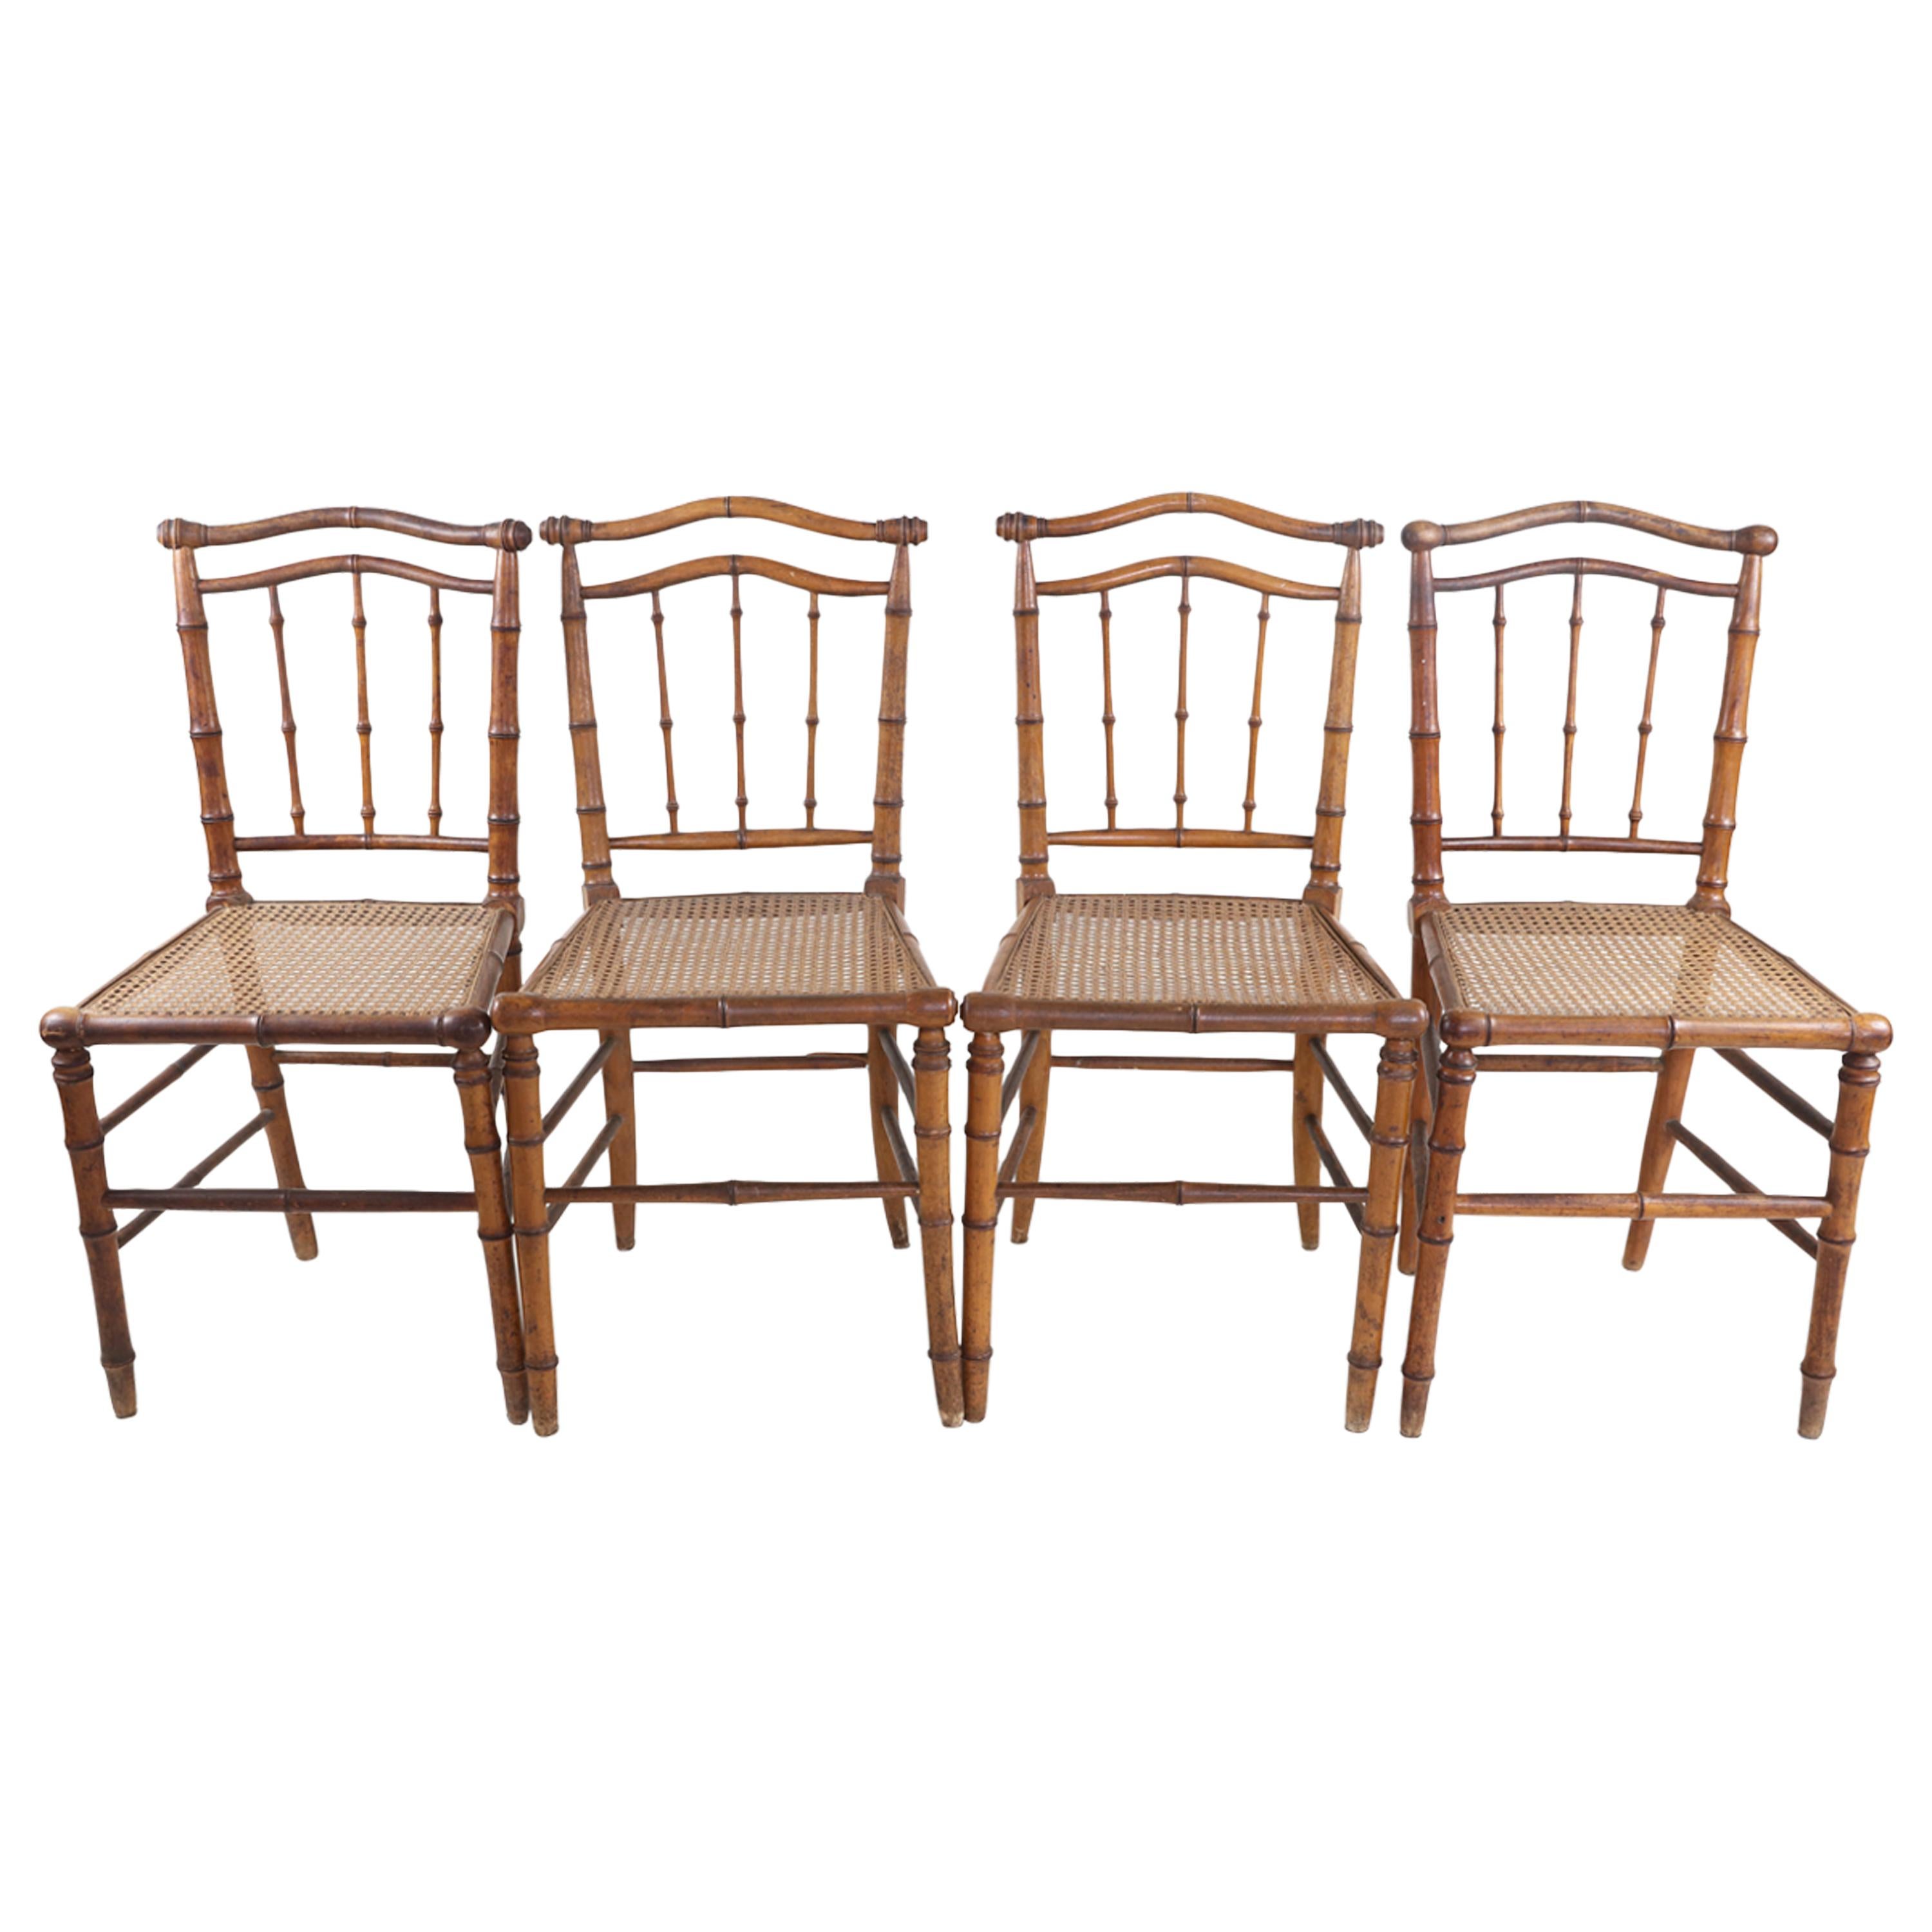 Antique Bamboo Chairs (4)